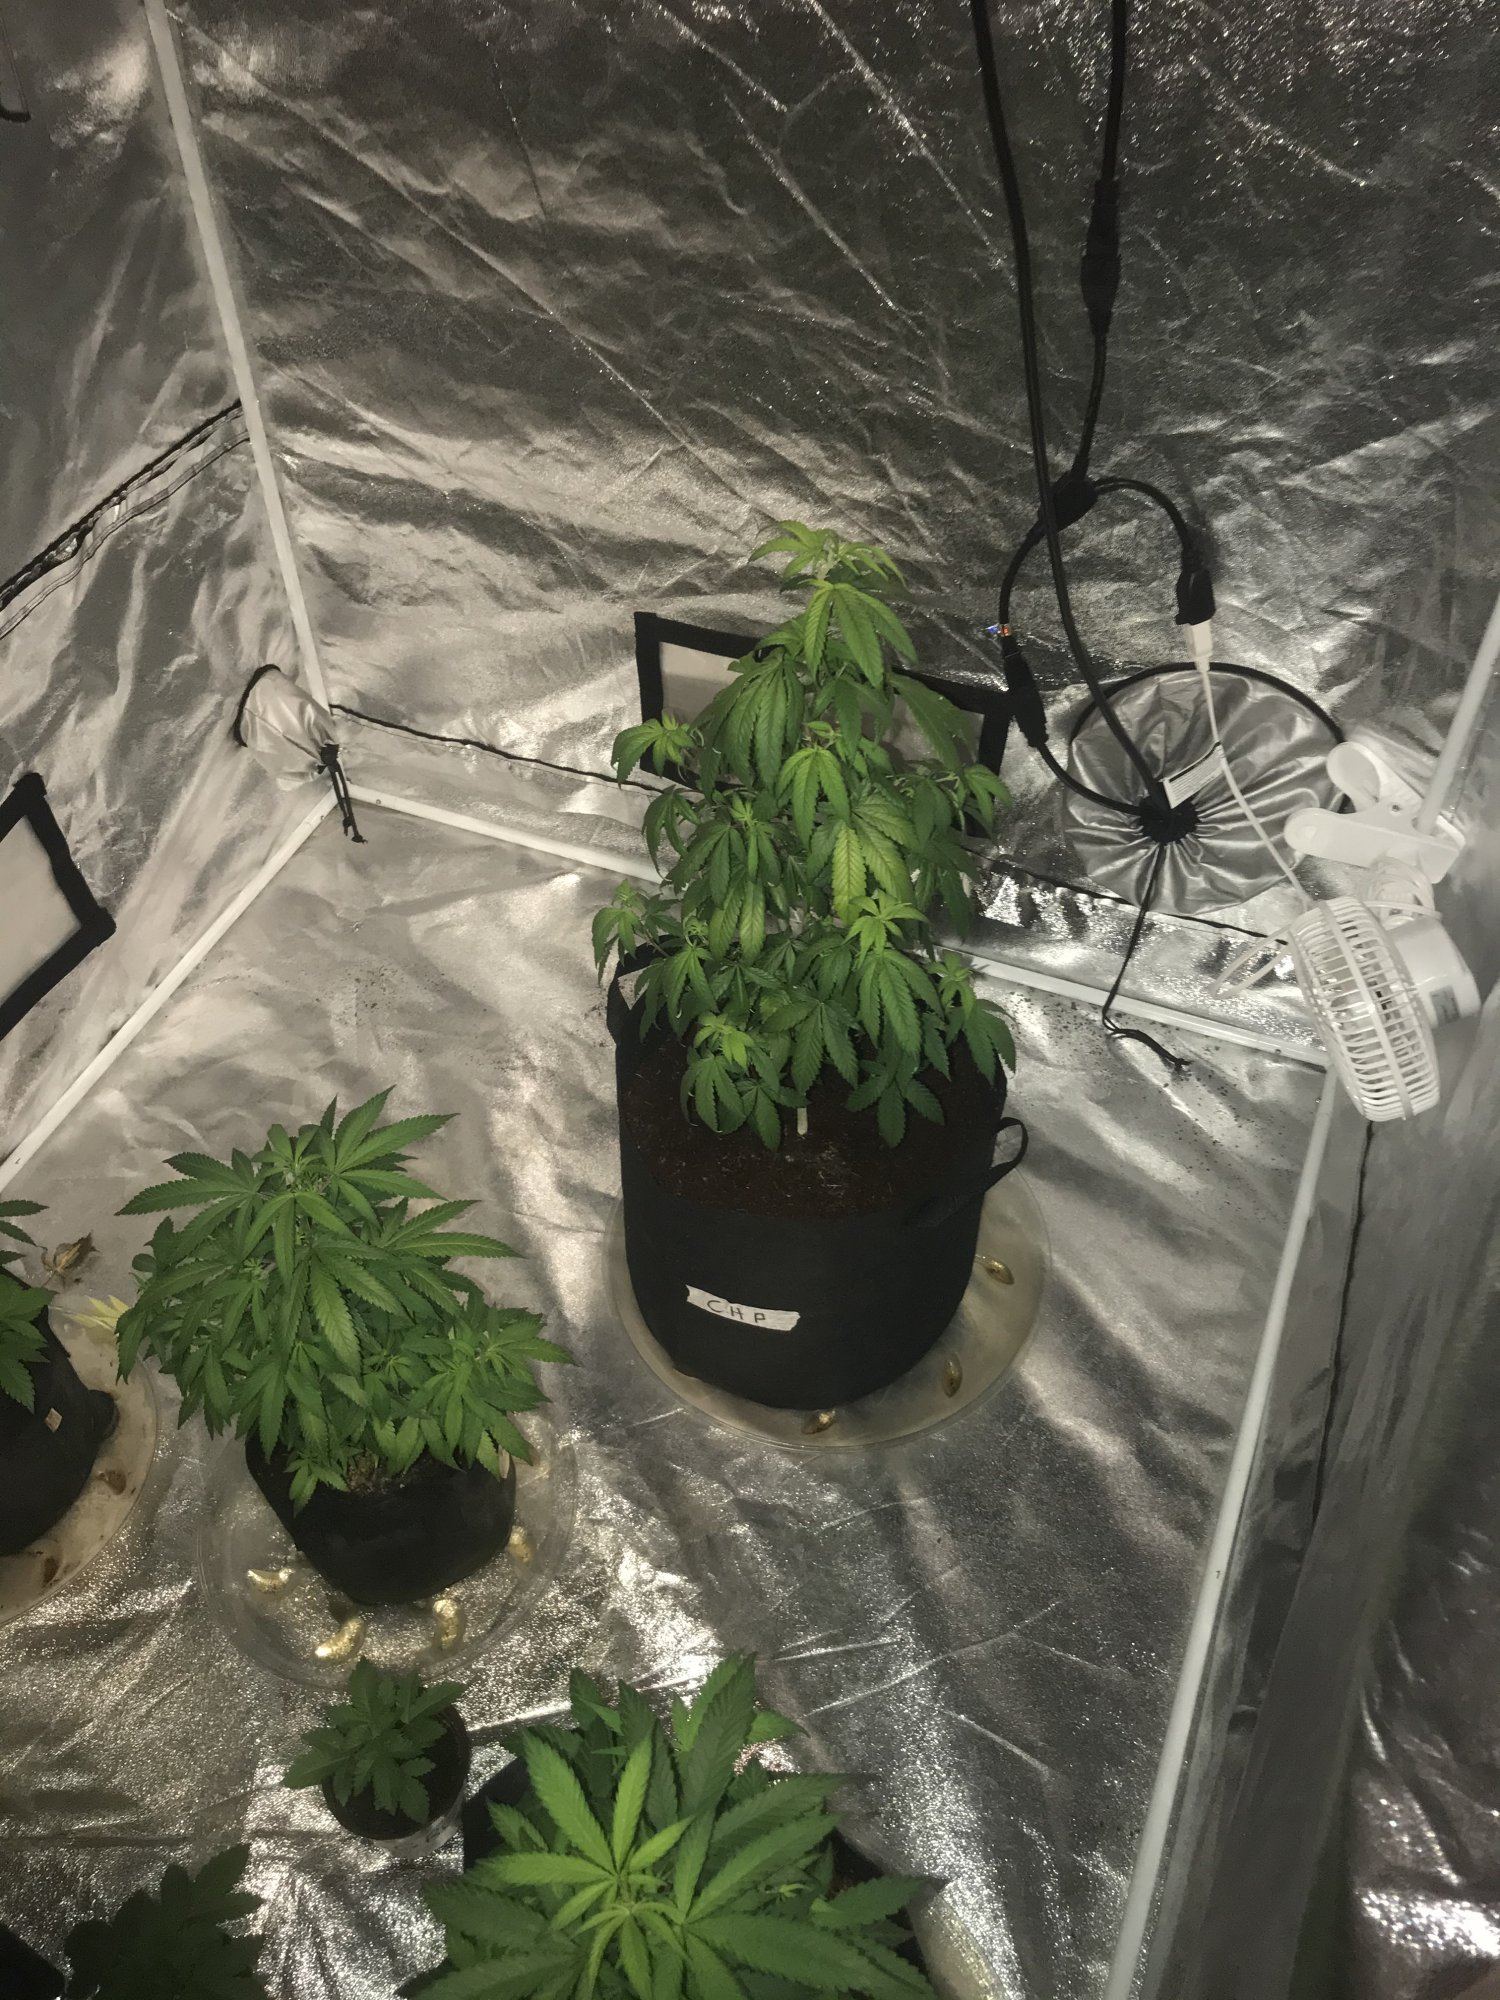 Need help moved house and my plants wont grow good 7